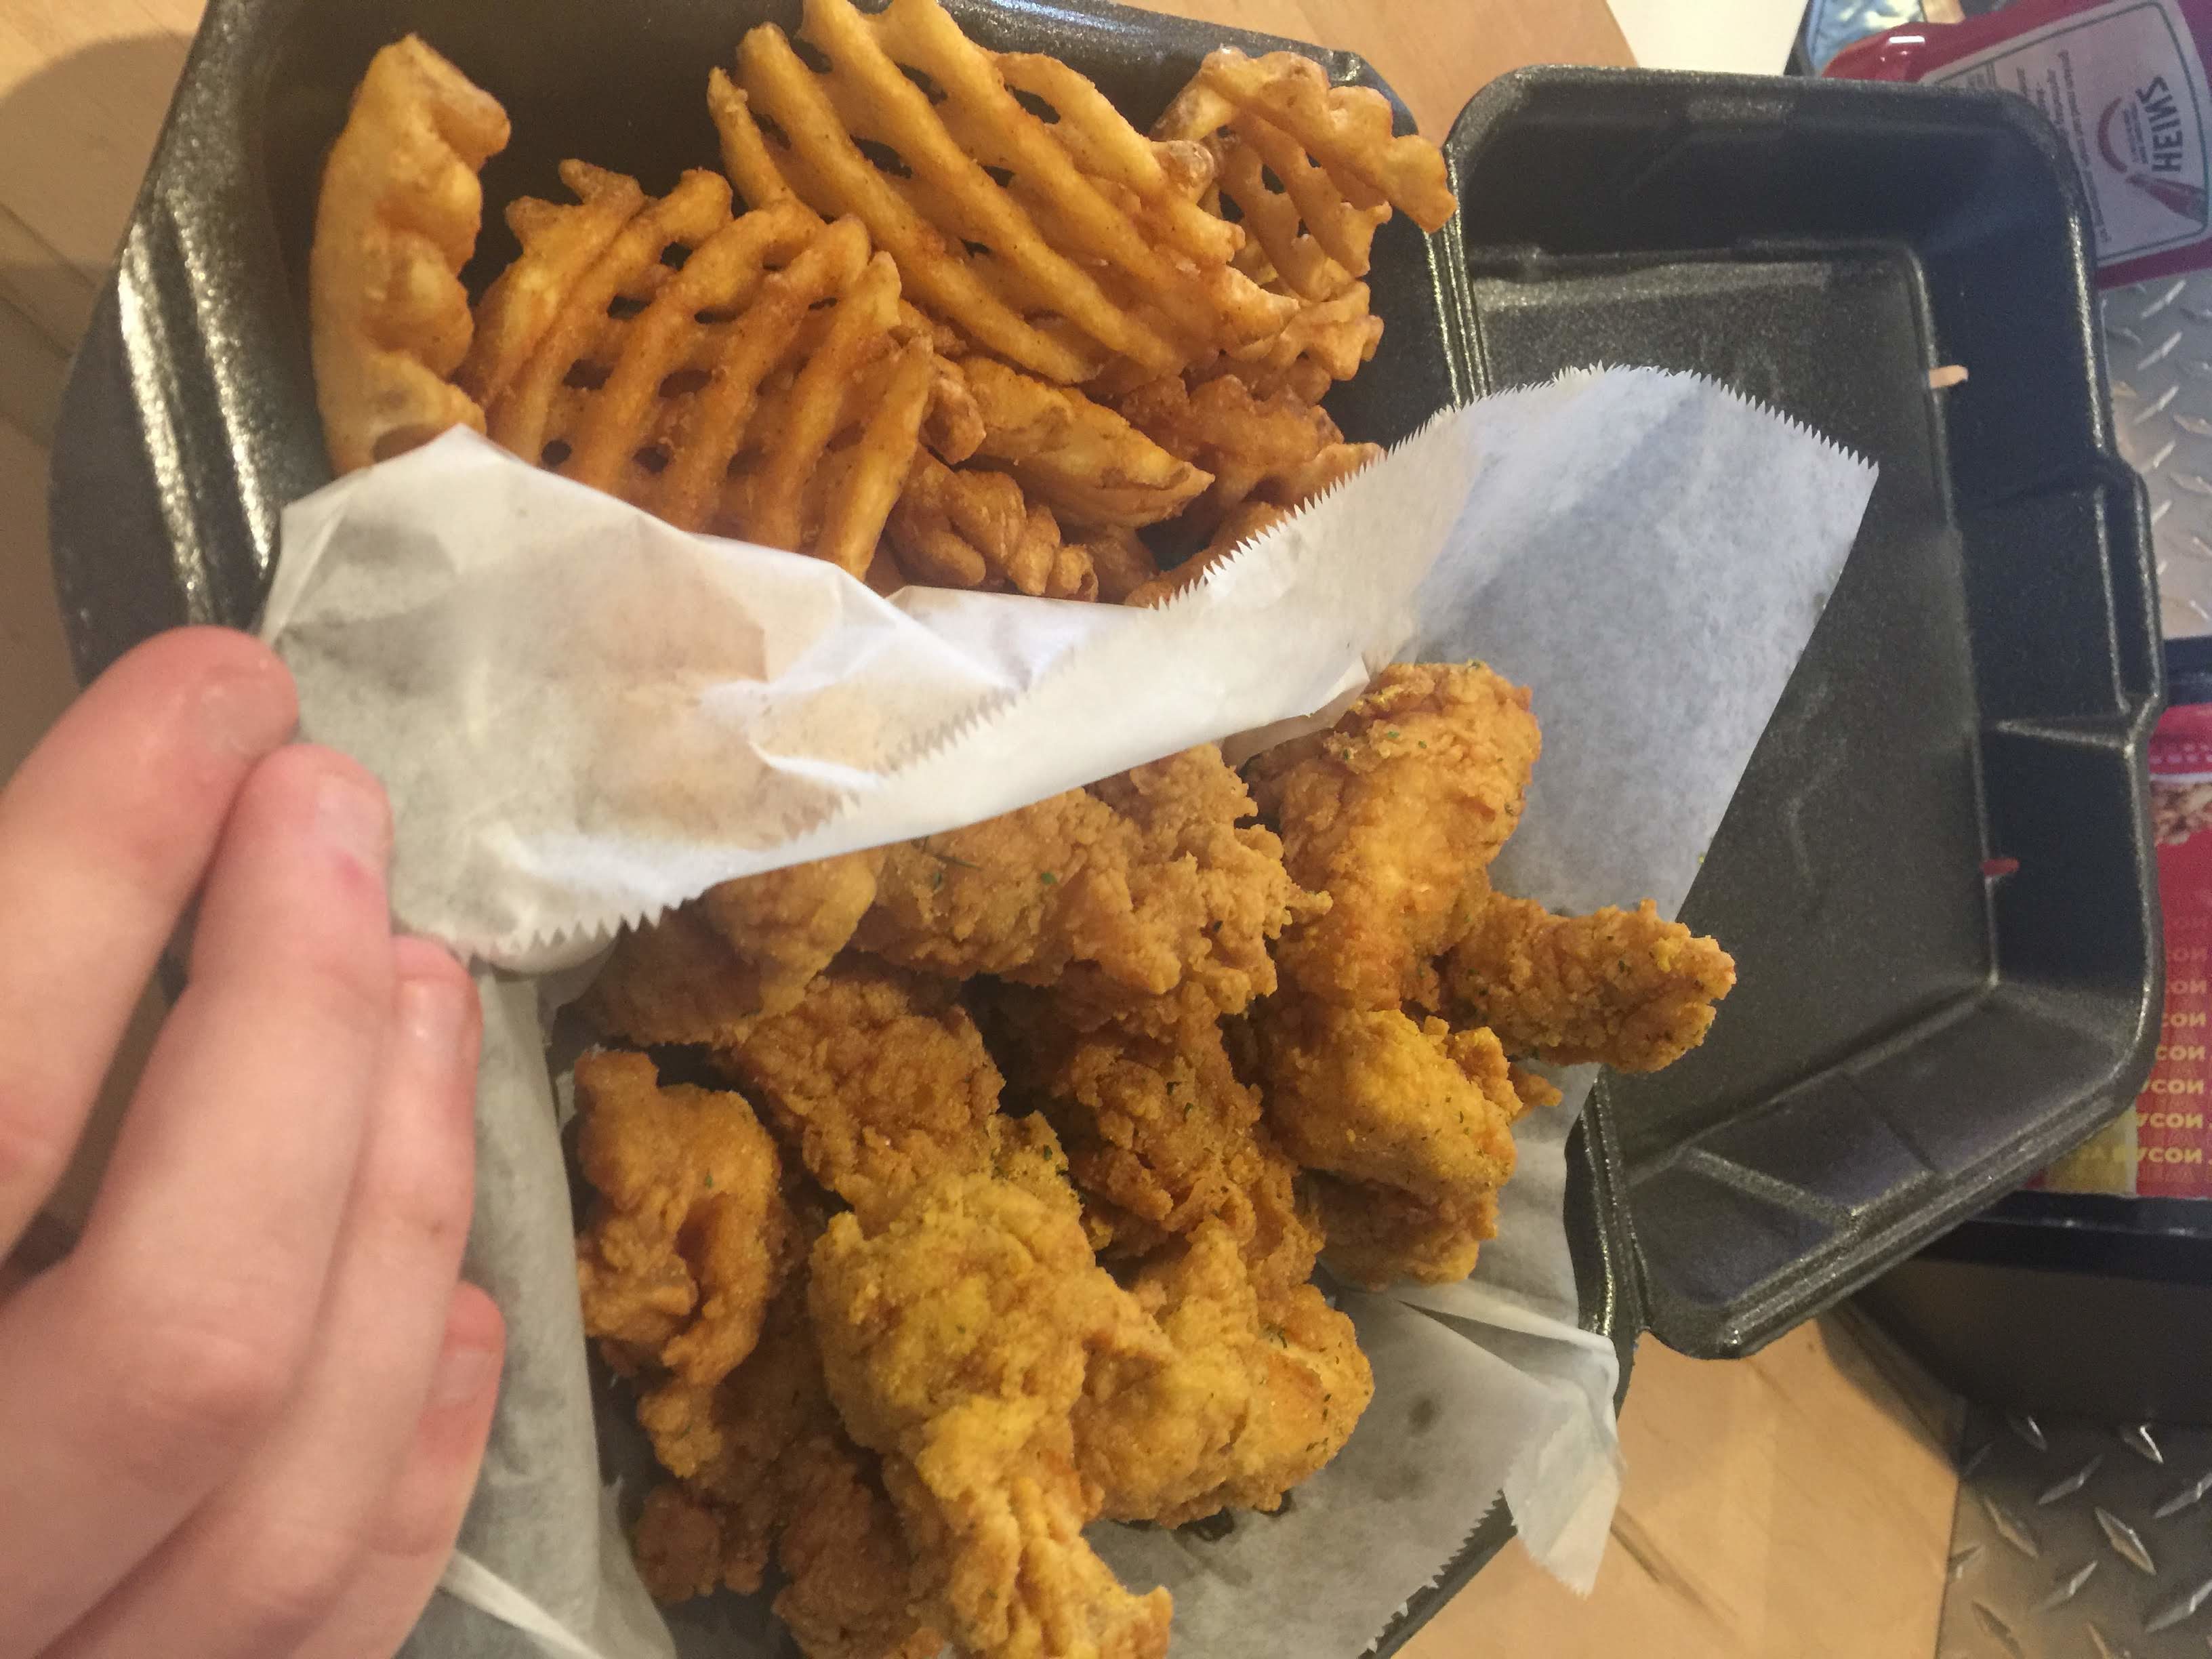 An order of boneless chicken wings and waffle fries from local restaurant Wings Over Worcester